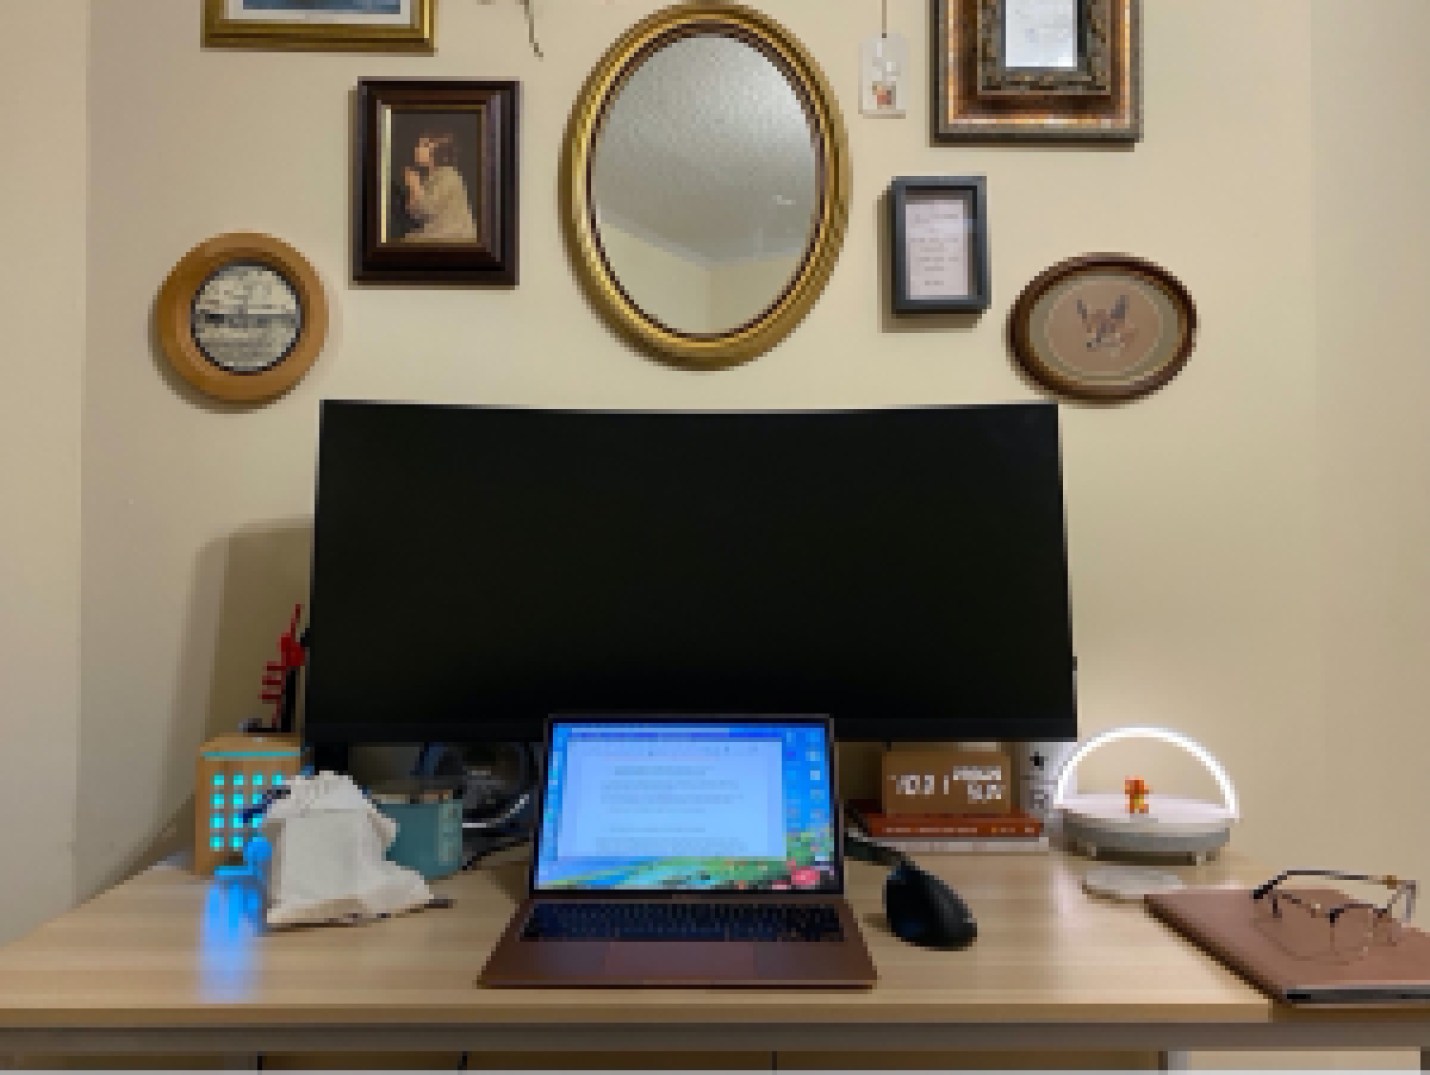 A view of a desk with a laptop in the foreground and a monitor behind. On the wall there are framed photos and a mirror. 